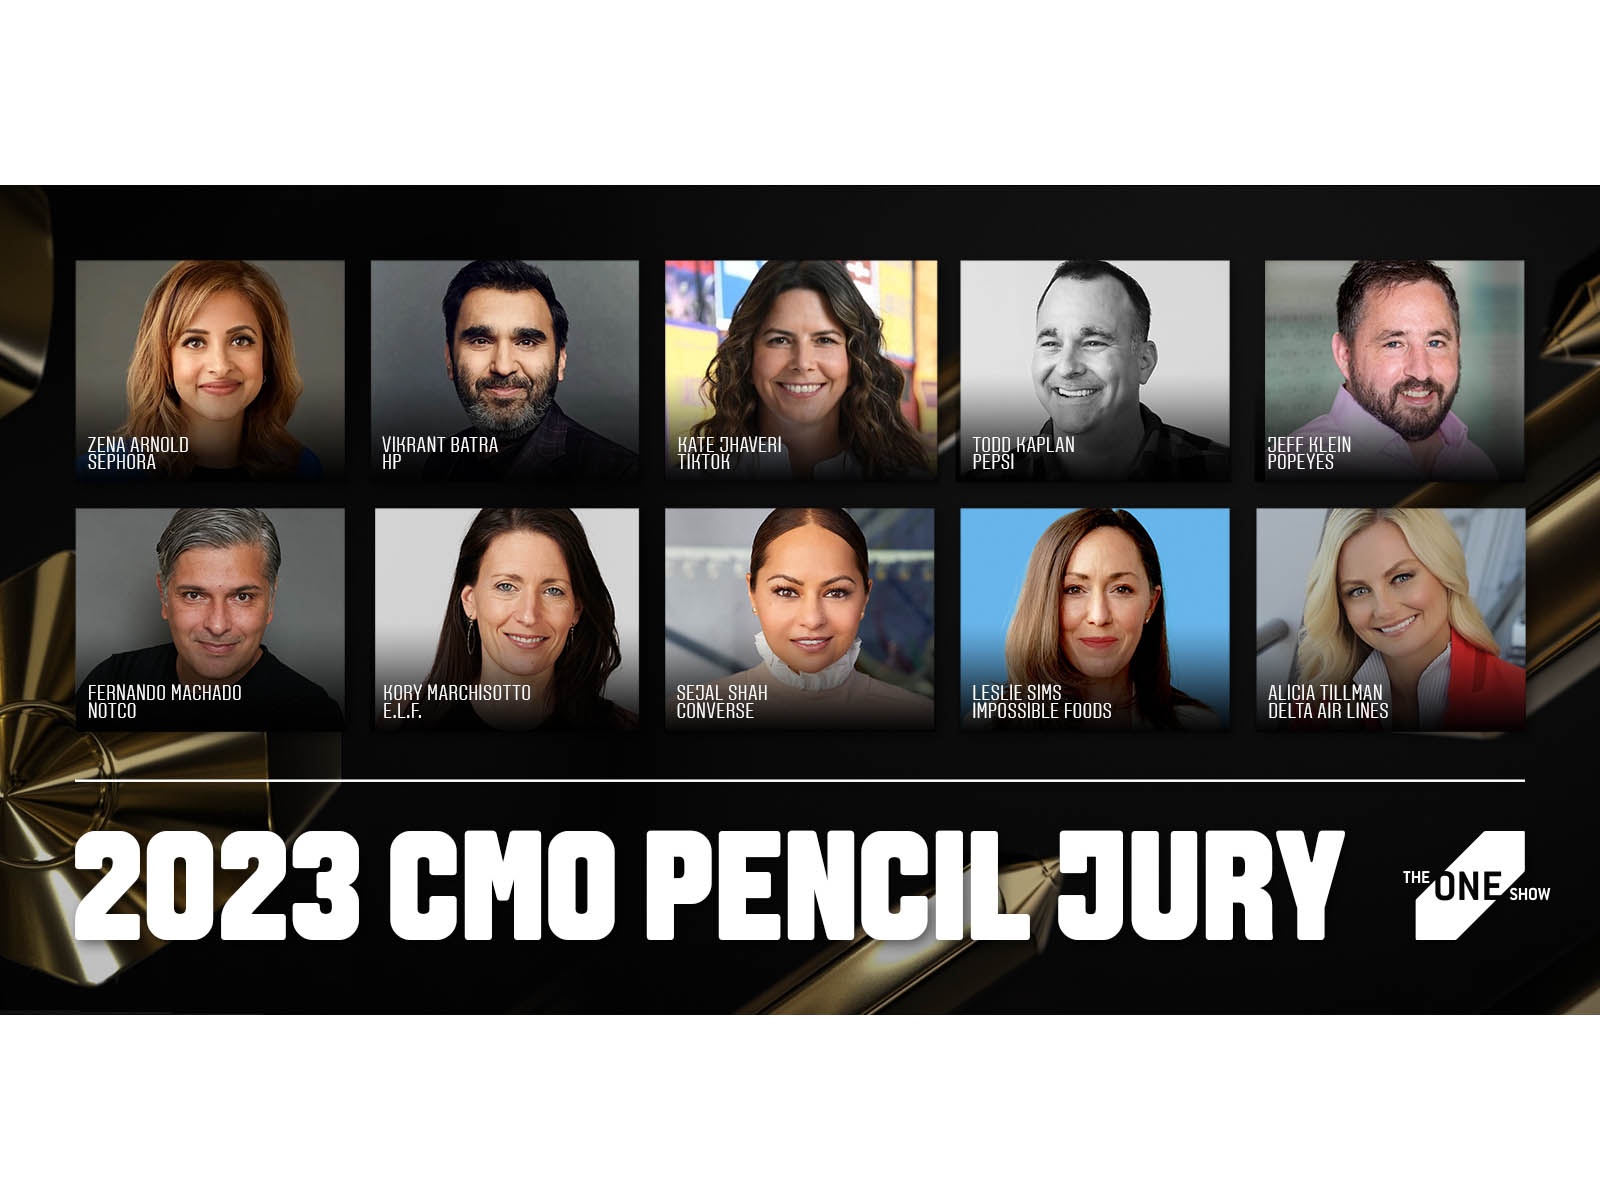 Jury of leading marketers to select 2023 One Show CMO Pencil winner